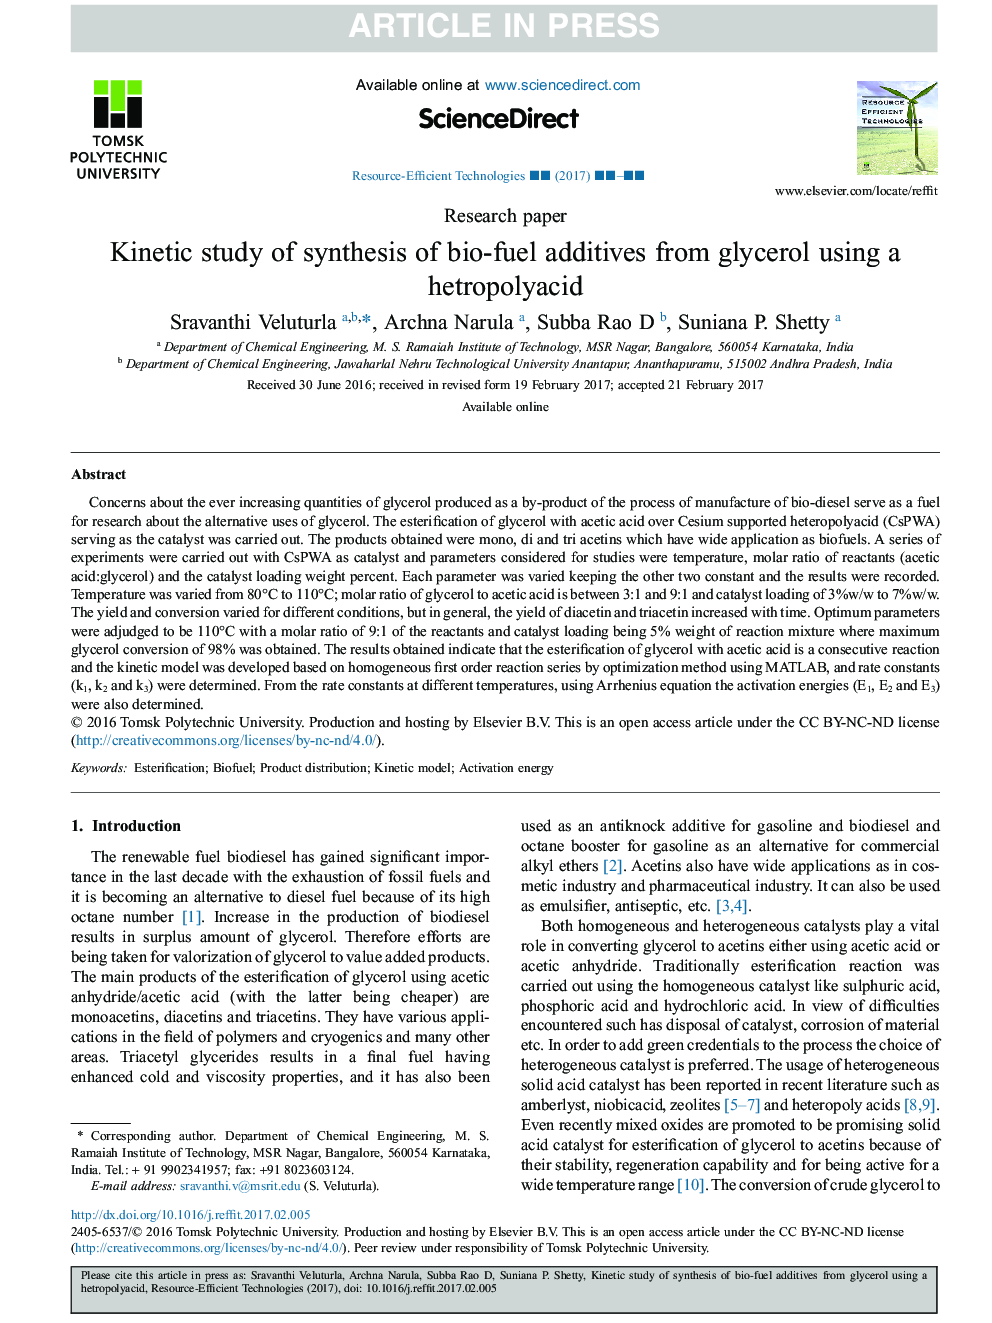 Kinetic study of synthesis of bio-fuel additives from glycerol using a hetropolyacid